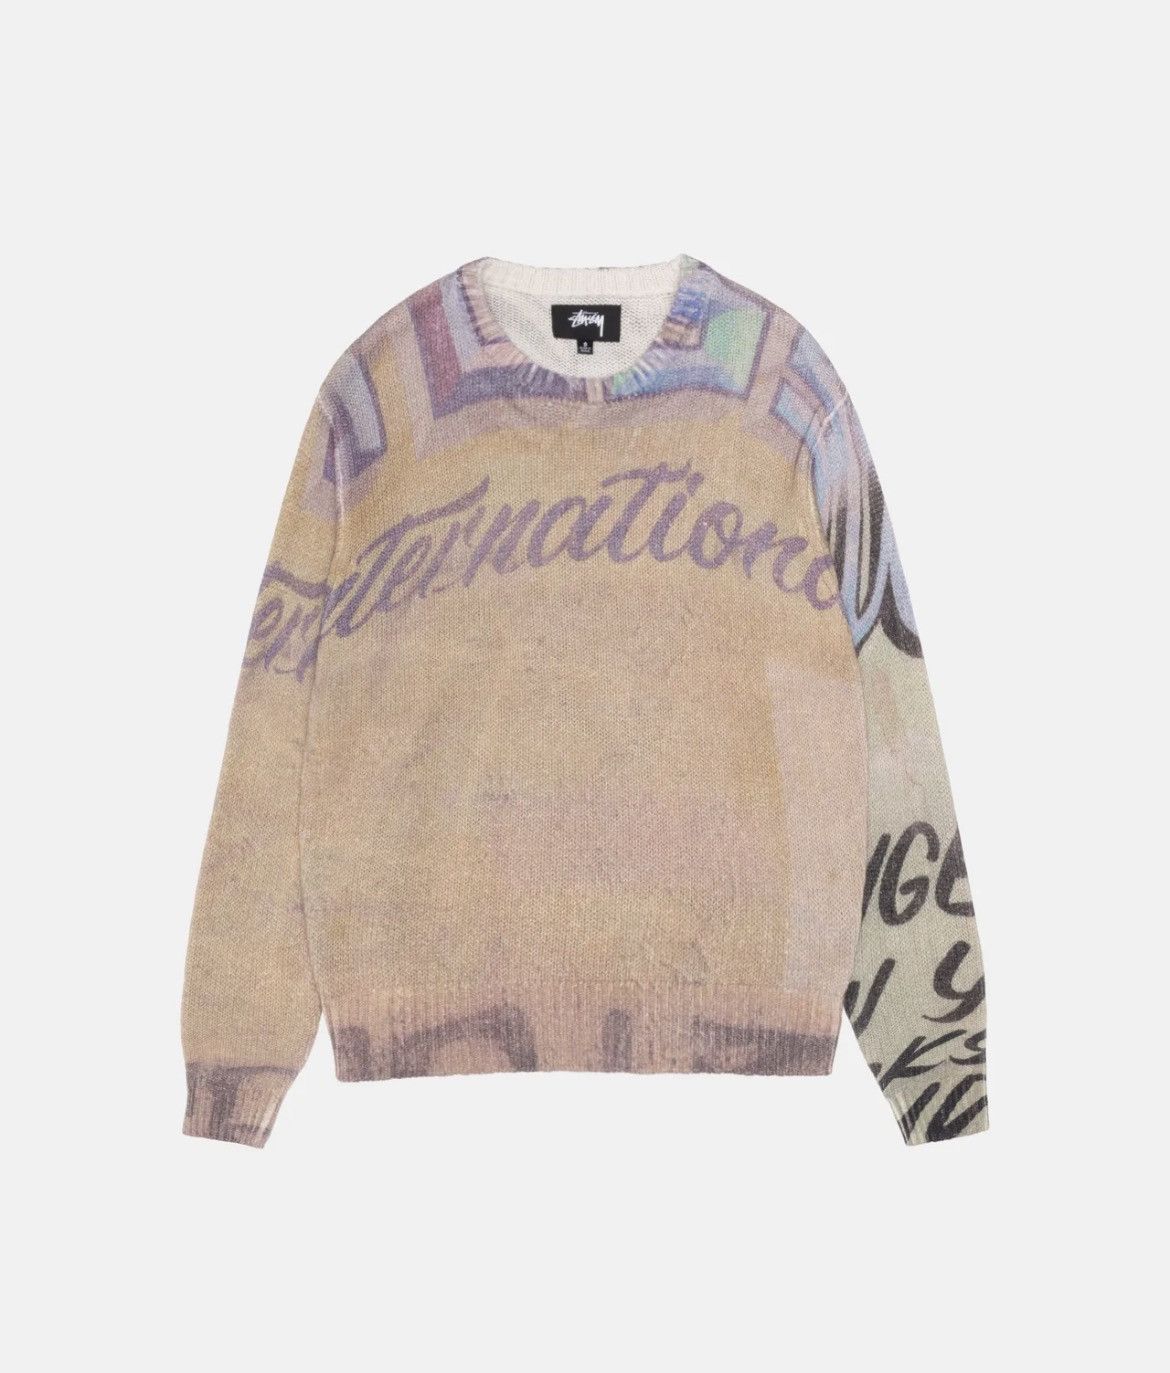 Vintage Stussy Alfonso Knit Sweater | Grailed